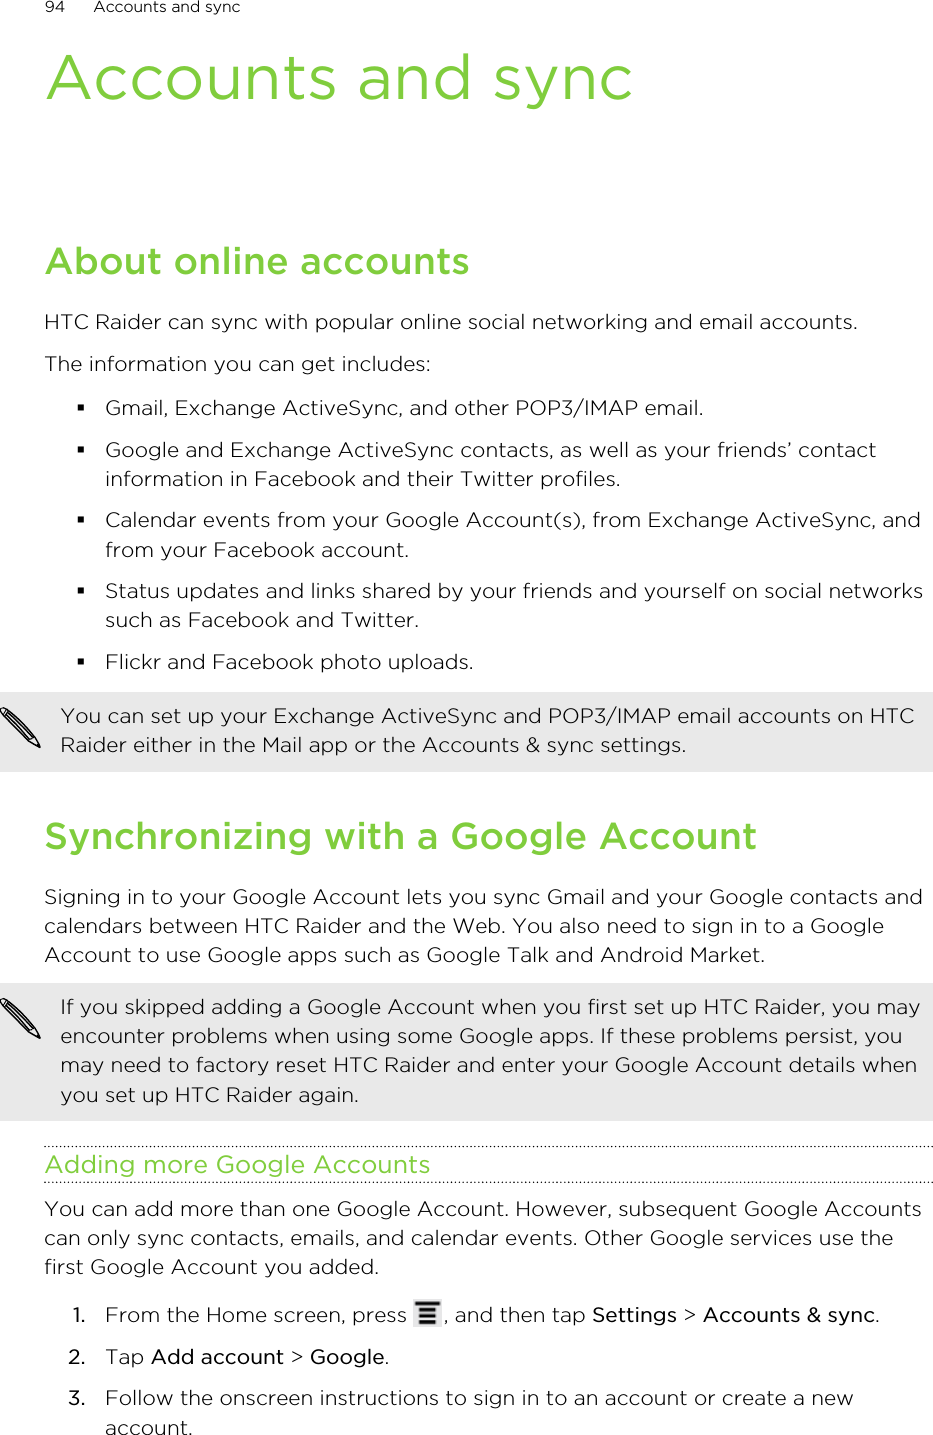 Accounts and syncAbout online accountsHTC Raider can sync with popular online social networking and email accounts.The information you can get includes:§Gmail, Exchange ActiveSync, and other POP3/IMAP email.§Google and Exchange ActiveSync contacts, as well as your friends’ contactinformation in Facebook and their Twitter profiles.§Calendar events from your Google Account(s), from Exchange ActiveSync, andfrom your Facebook account.§Status updates and links shared by your friends and yourself on social networkssuch as Facebook and Twitter.§Flickr and Facebook photo uploads.You can set up your Exchange ActiveSync and POP3/IMAP email accounts on HTCRaider either in the Mail app or the Accounts &amp; sync settings.Synchronizing with a Google AccountSigning in to your Google Account lets you sync Gmail and your Google contacts andcalendars between HTC Raider and the Web. You also need to sign in to a GoogleAccount to use Google apps such as Google Talk and Android Market.If you skipped adding a Google Account when you first set up HTC Raider, you mayencounter problems when using some Google apps. If these problems persist, youmay need to factory reset HTC Raider and enter your Google Account details whenyou set up HTC Raider again.Adding more Google AccountsYou can add more than one Google Account. However, subsequent Google Accountscan only sync contacts, emails, and calendar events. Other Google services use thefirst Google Account you added.1. From the Home screen, press  , and then tap Settings &gt; Accounts &amp; sync.2. Tap Add account &gt; Google.3. Follow the onscreen instructions to sign in to an account or create a newaccount.94 Accounts and sync